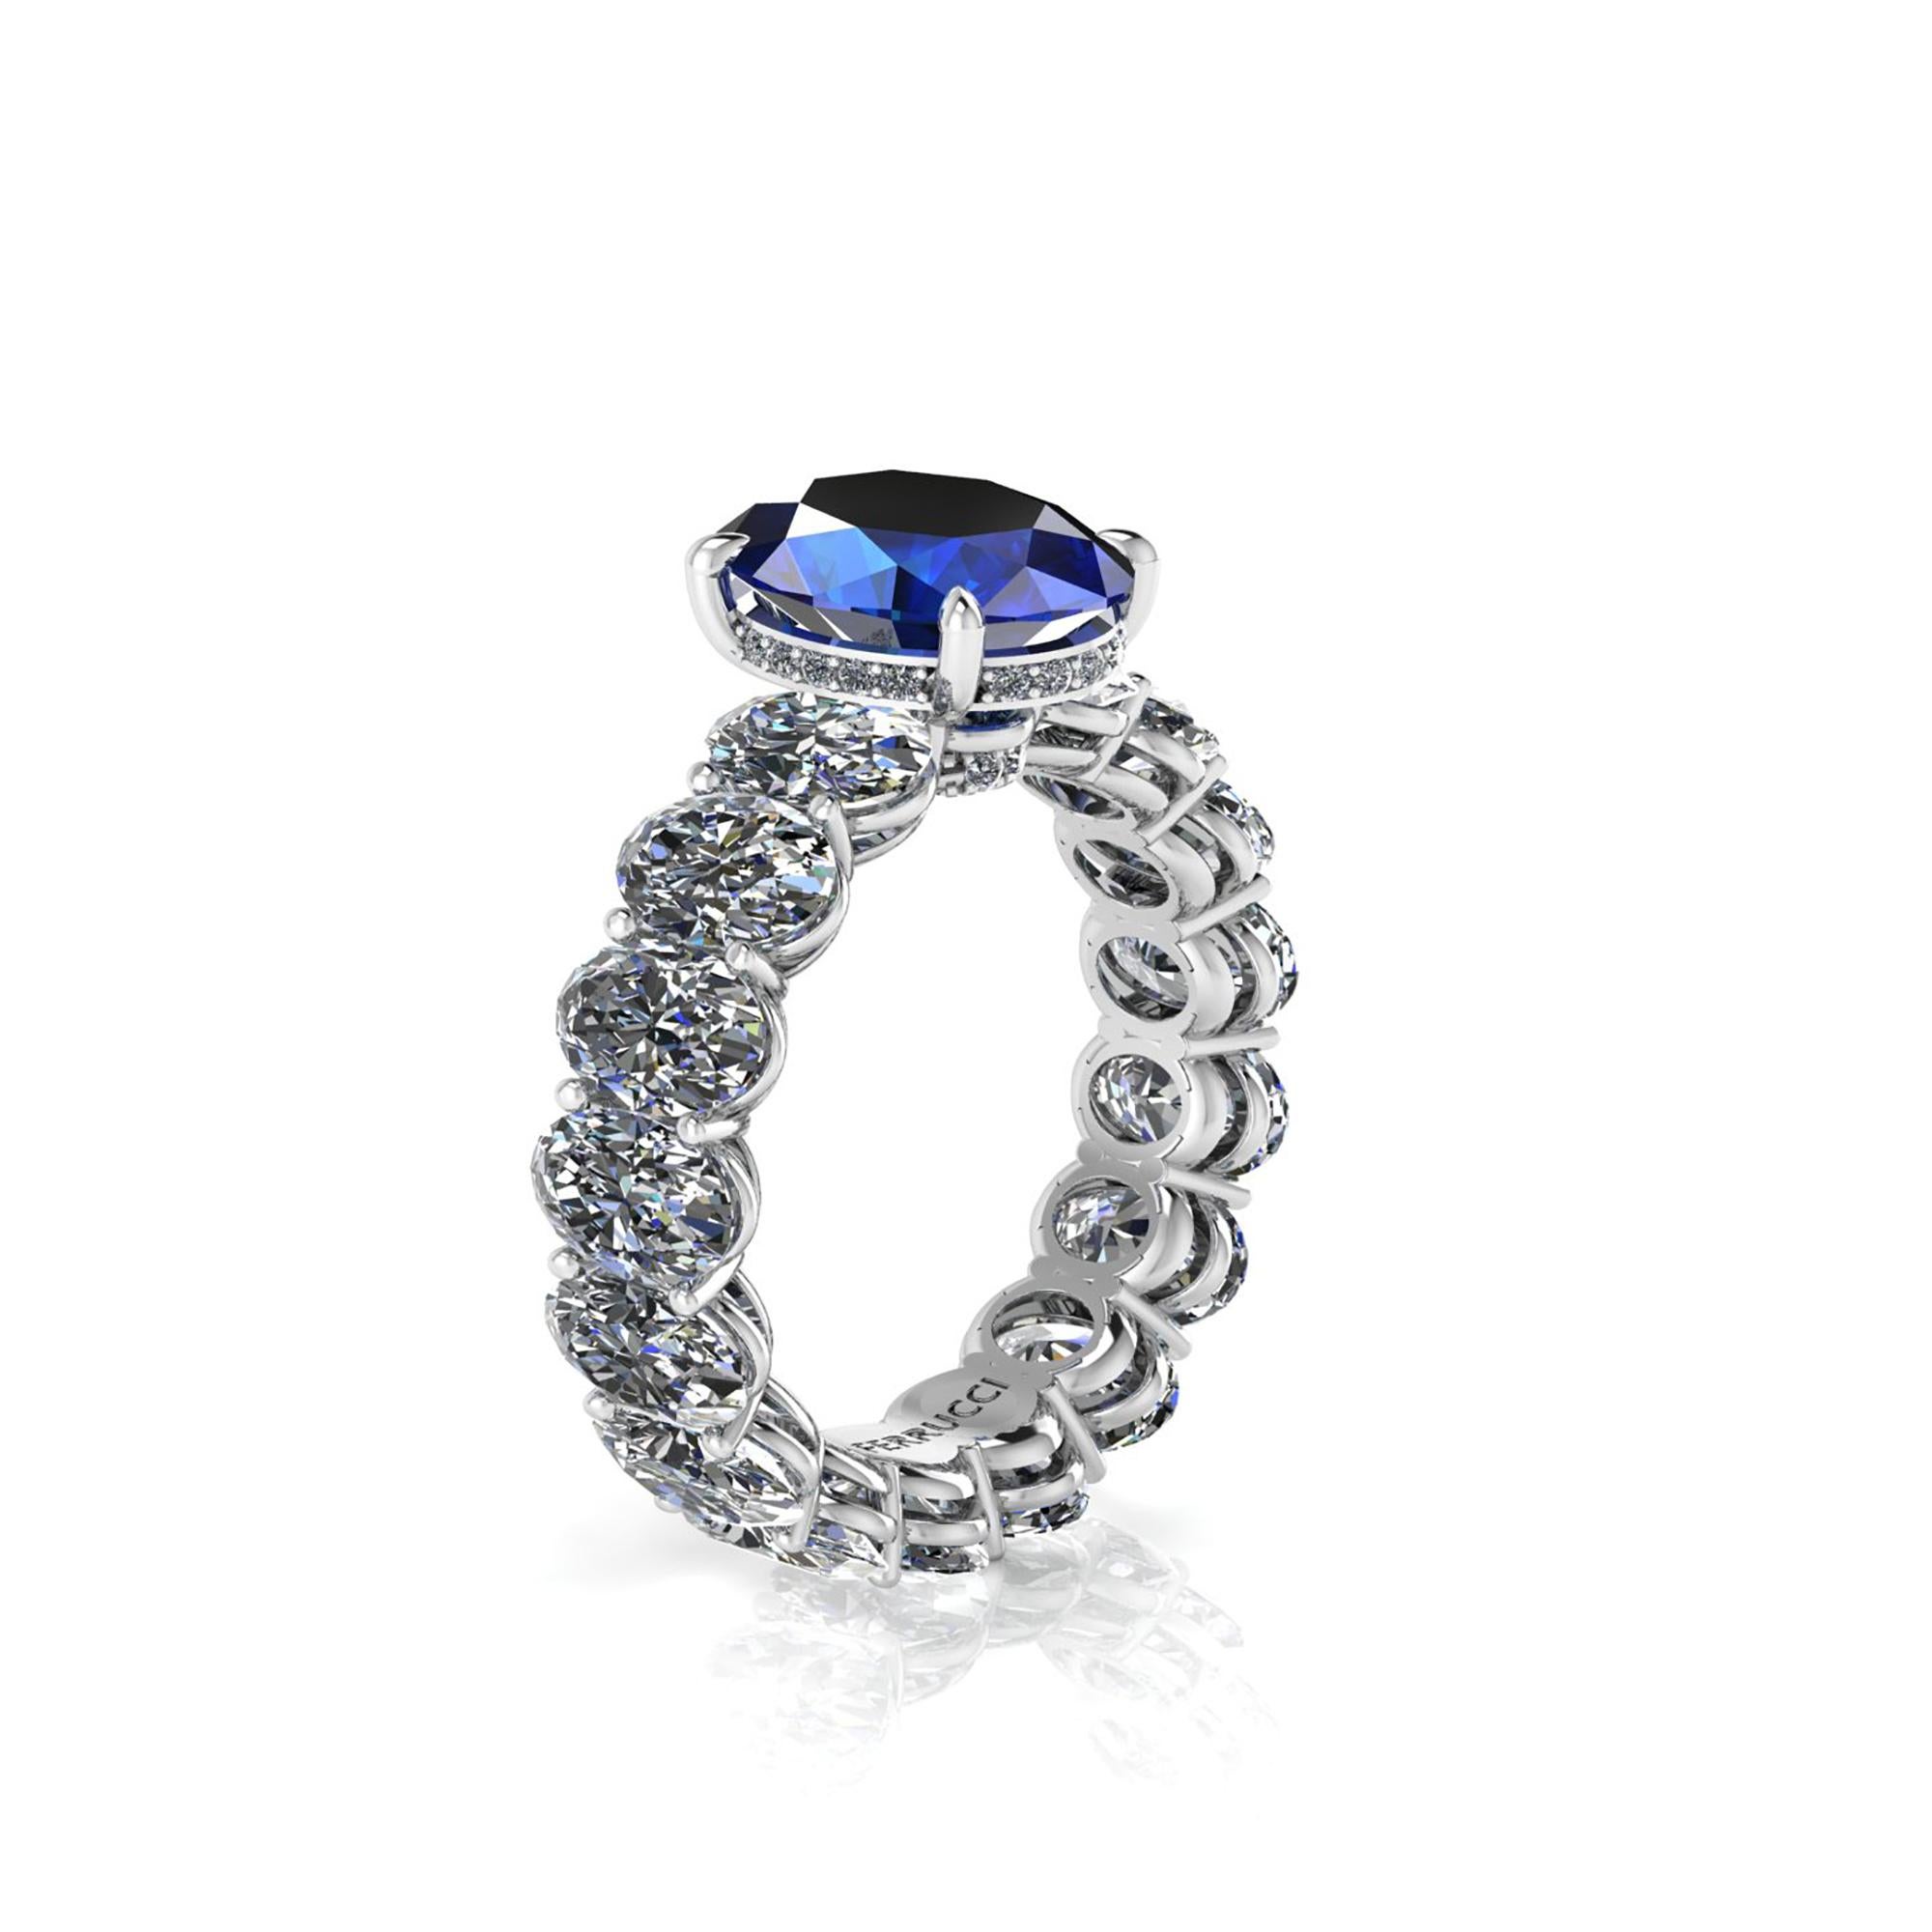 GIA Certified 3.34 Carat  Blue Sapphire, set on a Platinum 950, Oval diamond eternity ring, designed and hand made in New York with the gem adorned by pave of white round diamonds, for a total diamond carat weight of 5.10 carats, color H, clarity